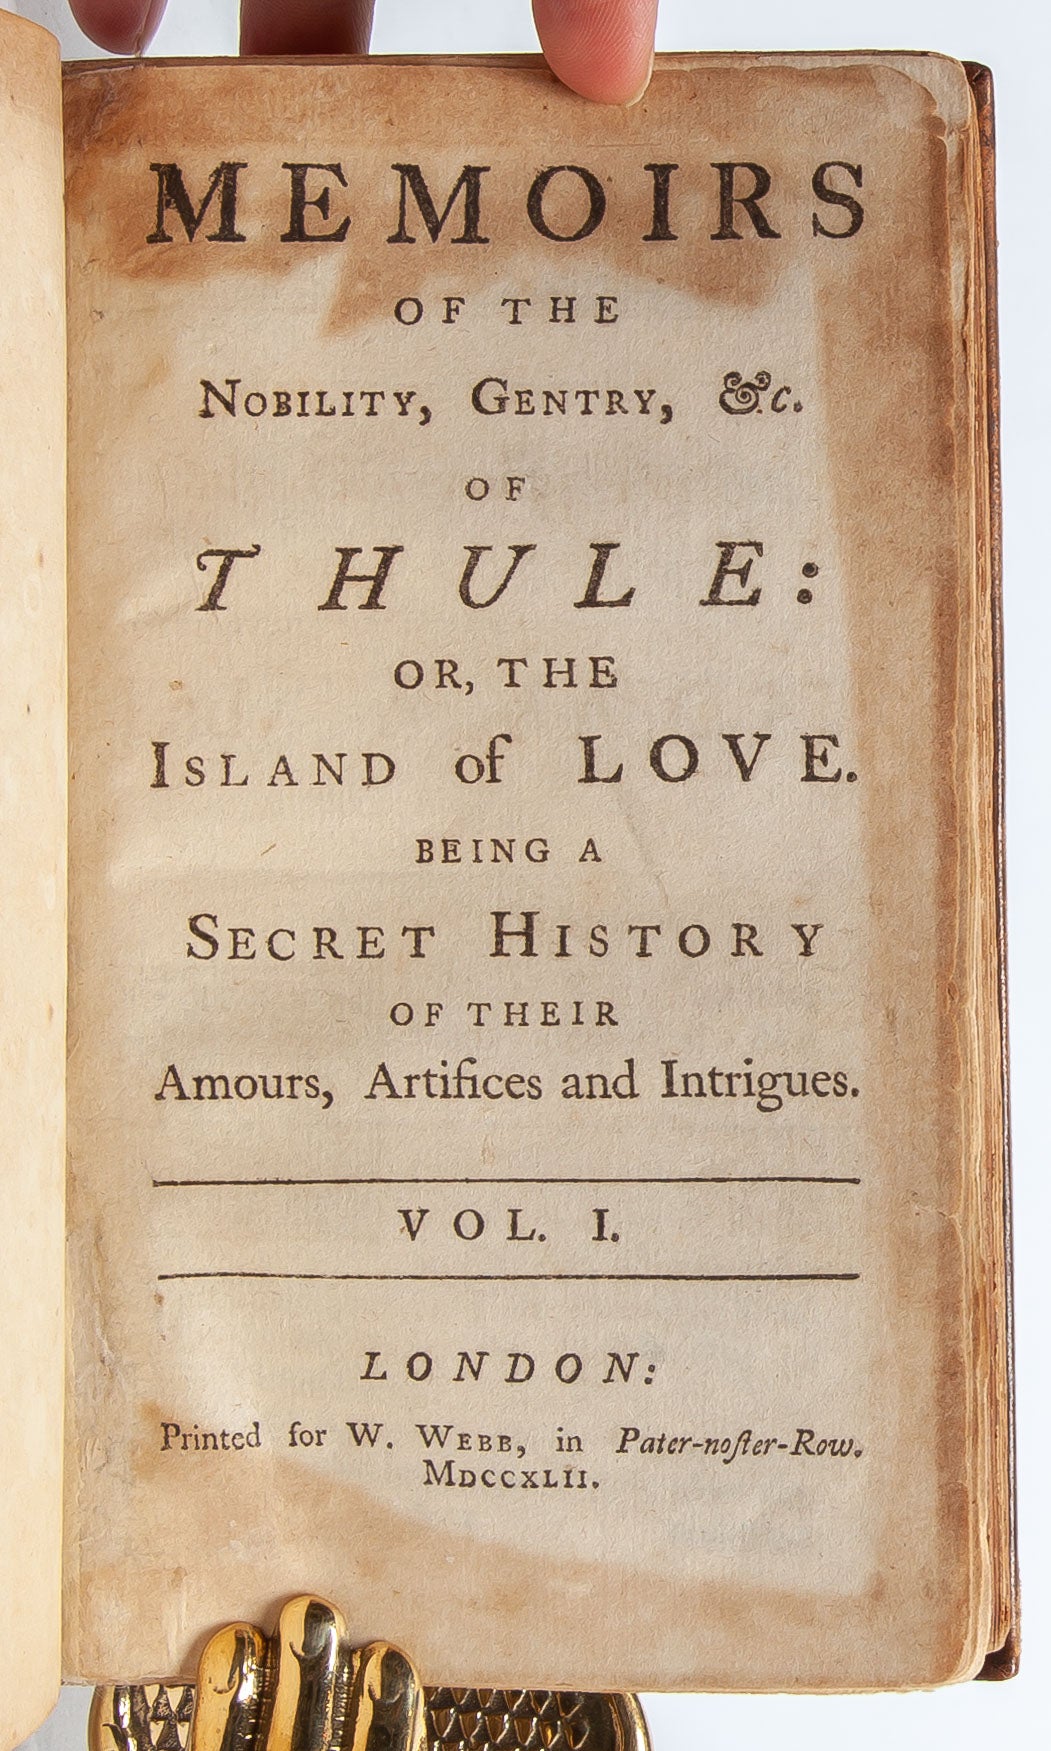 Memoirs of the Nobility, Gentry andc. of Thule or, The Island of Love photo